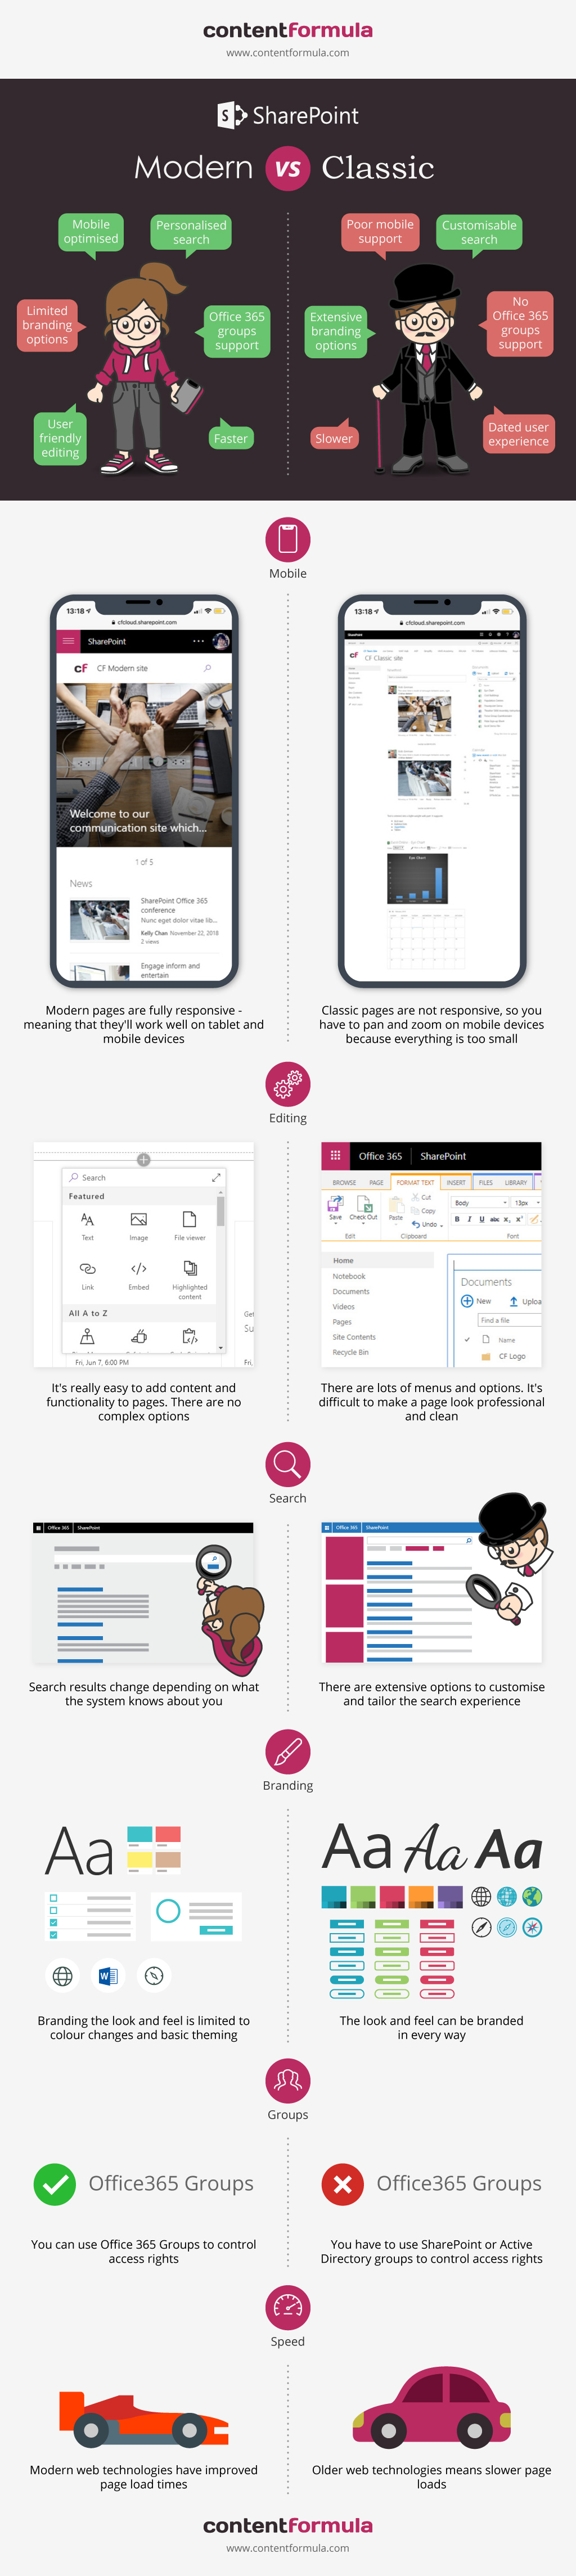 SharePoint Modern vs Classic infographic